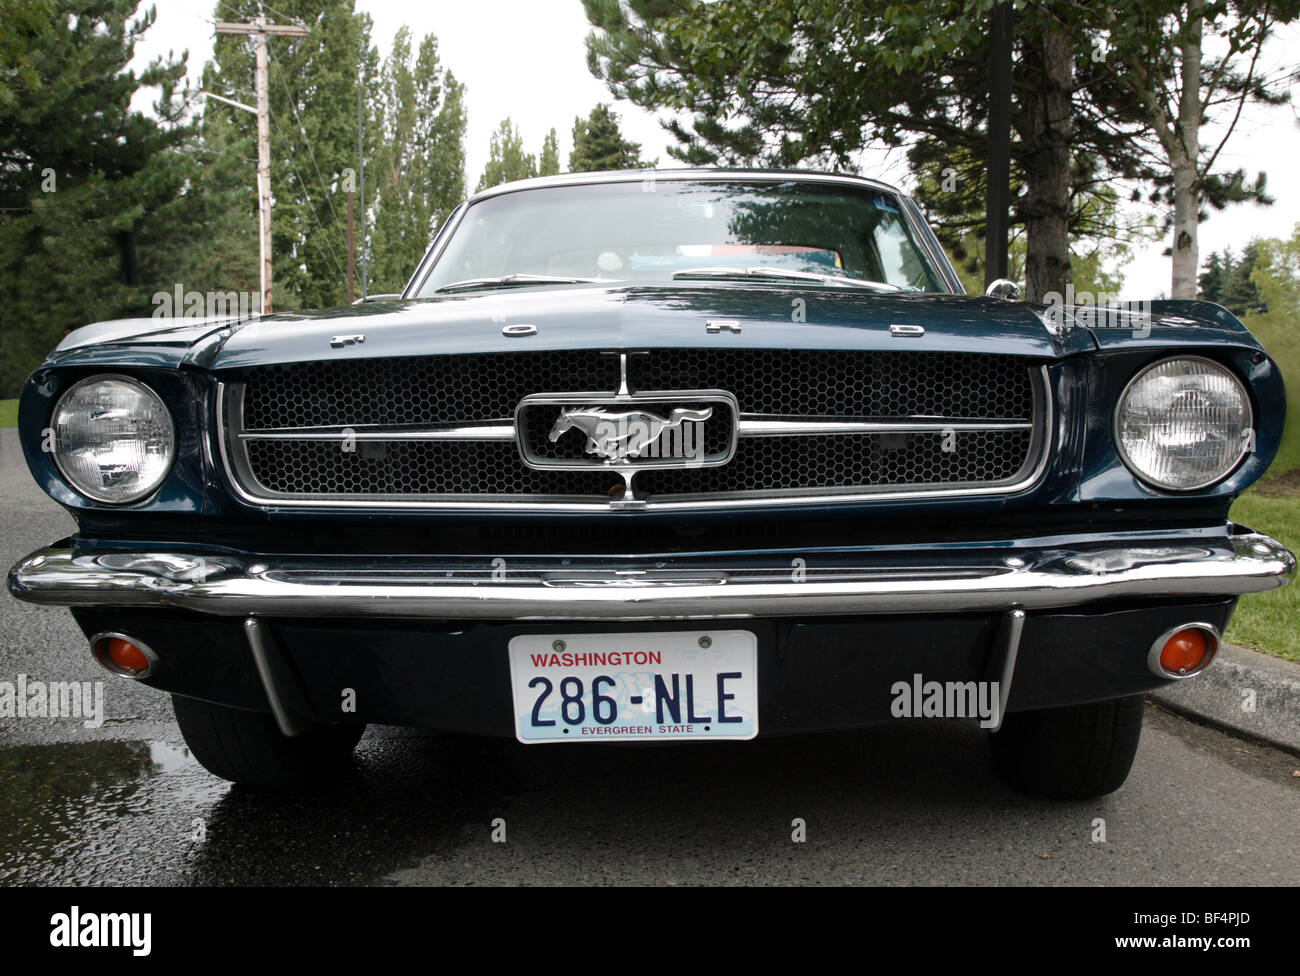 Front view of a 1965, First generation Ford Mustang on show at  the 22nd annual Northwest Muscle Car Show,  Issaquah, Washington, USA Stock Photo